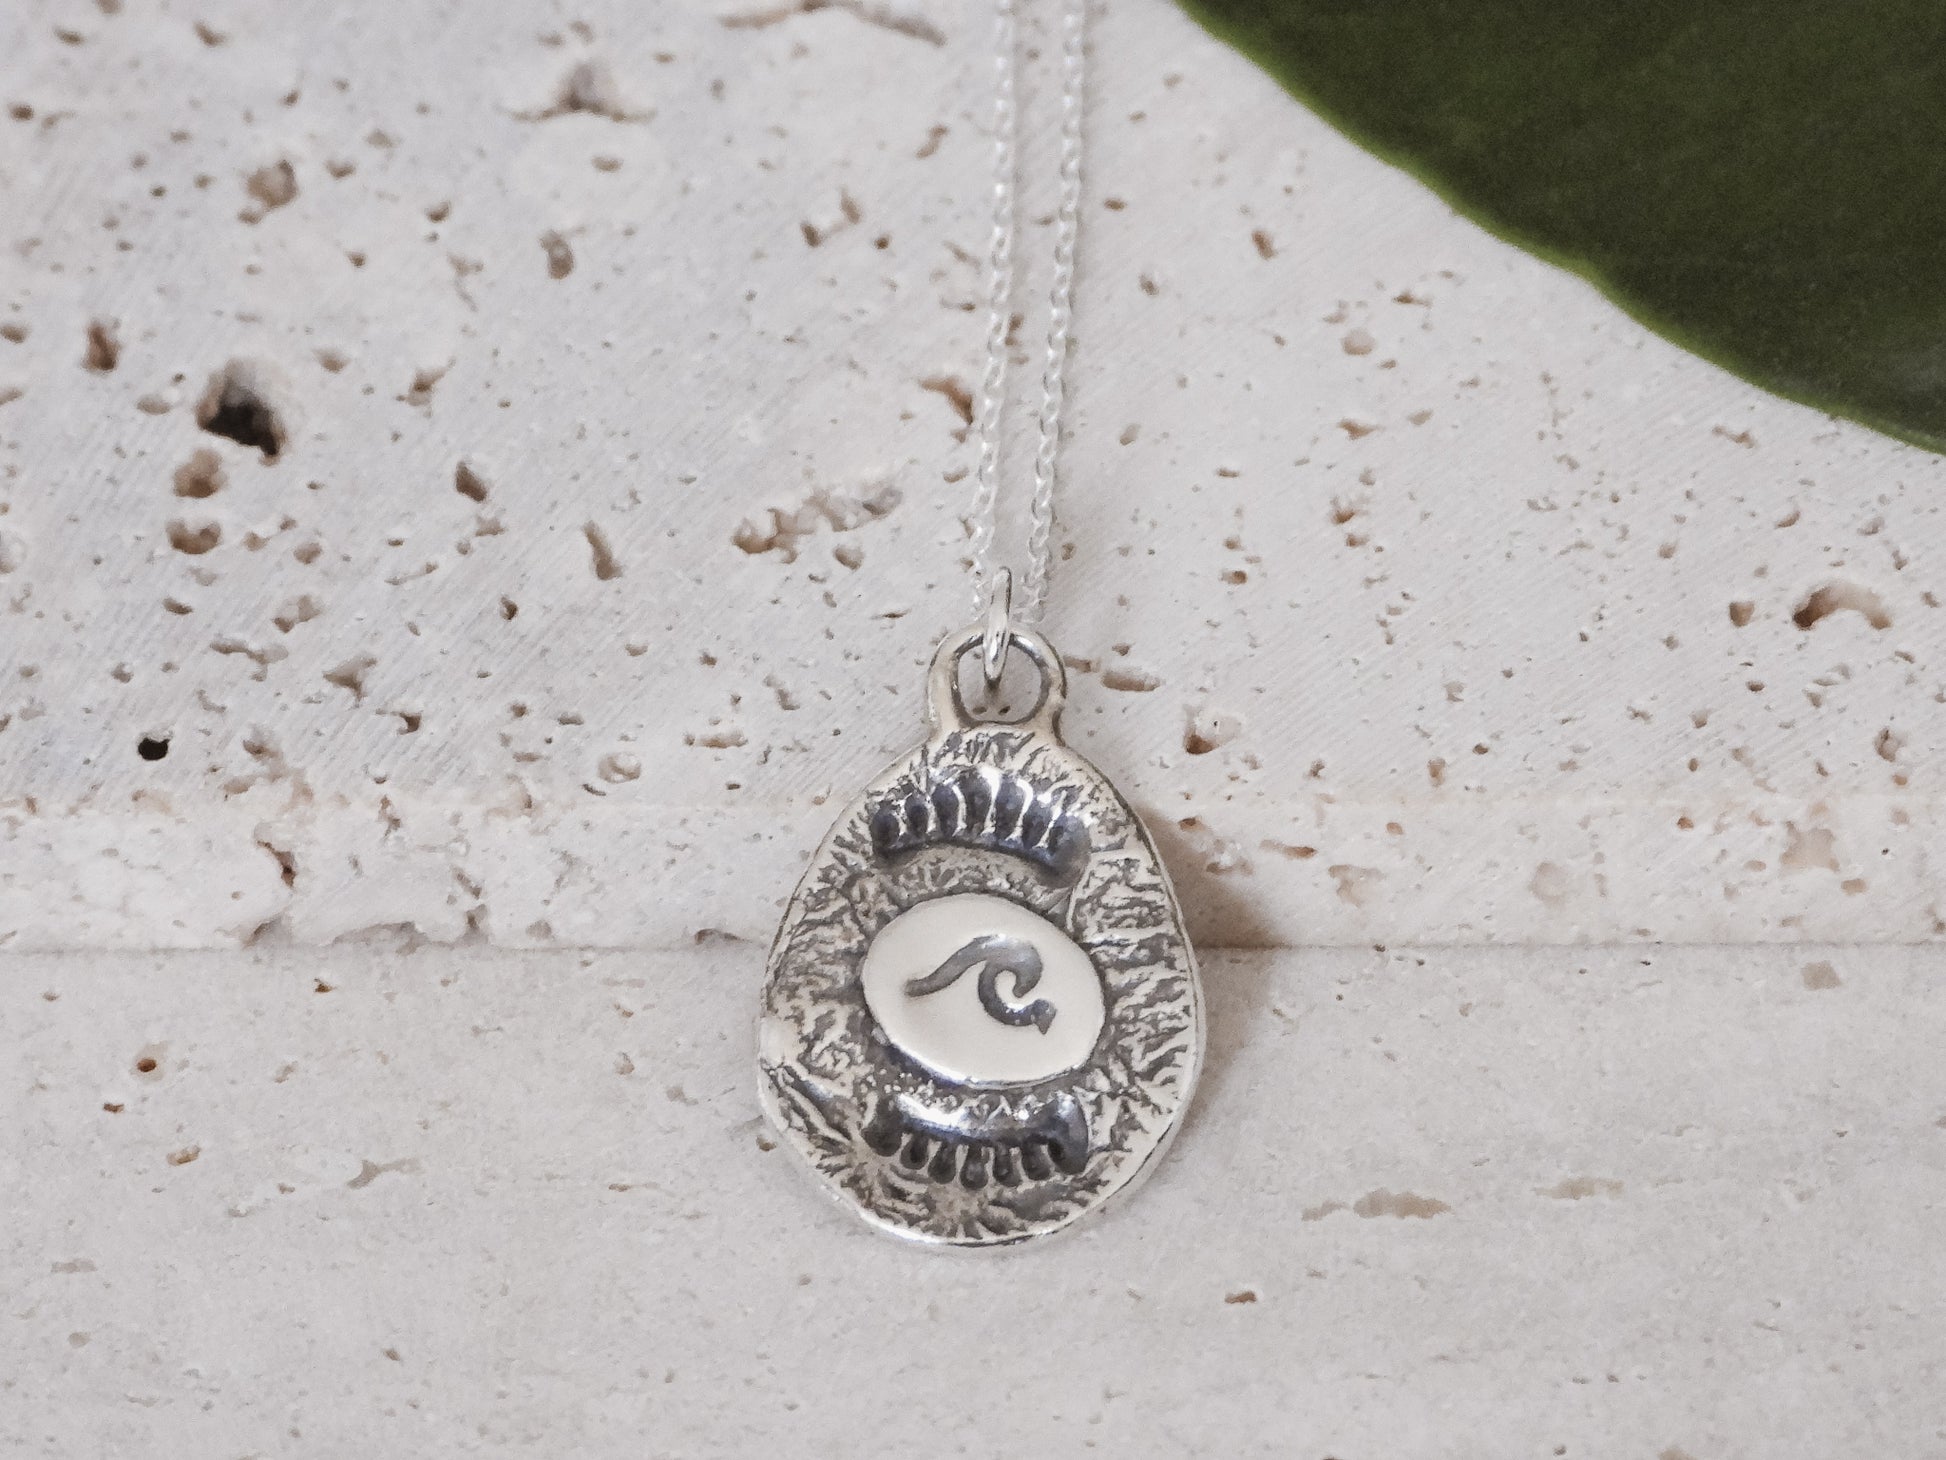 Cornish wave recycled silver charm pendant necklace